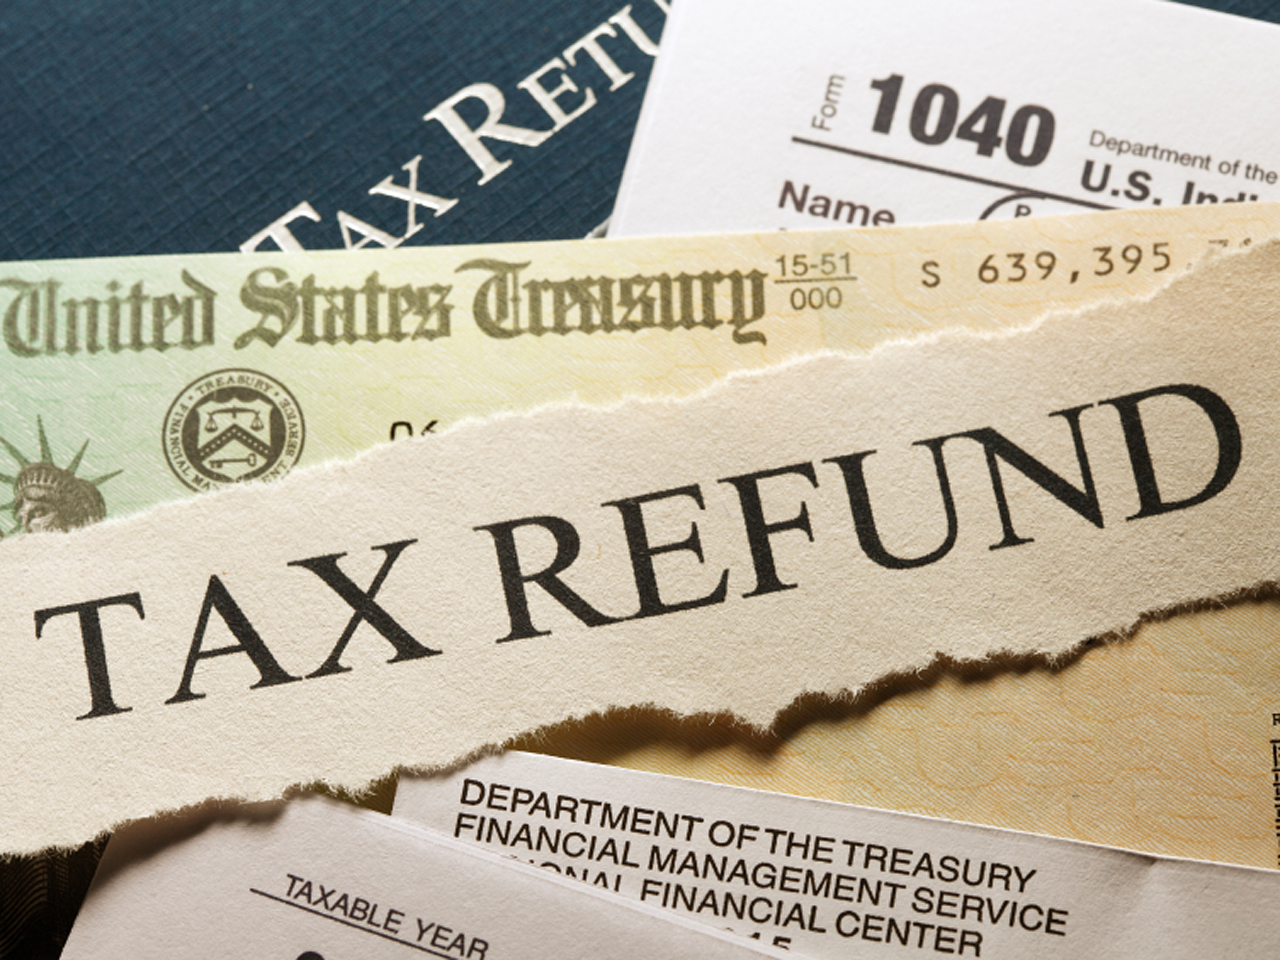 If you have yet to file your 2019 federal tax return, now is the time to act if you anticipate getting a refund. That's because the final filing deadline is approaching for those wishing to claim a tax refund. 